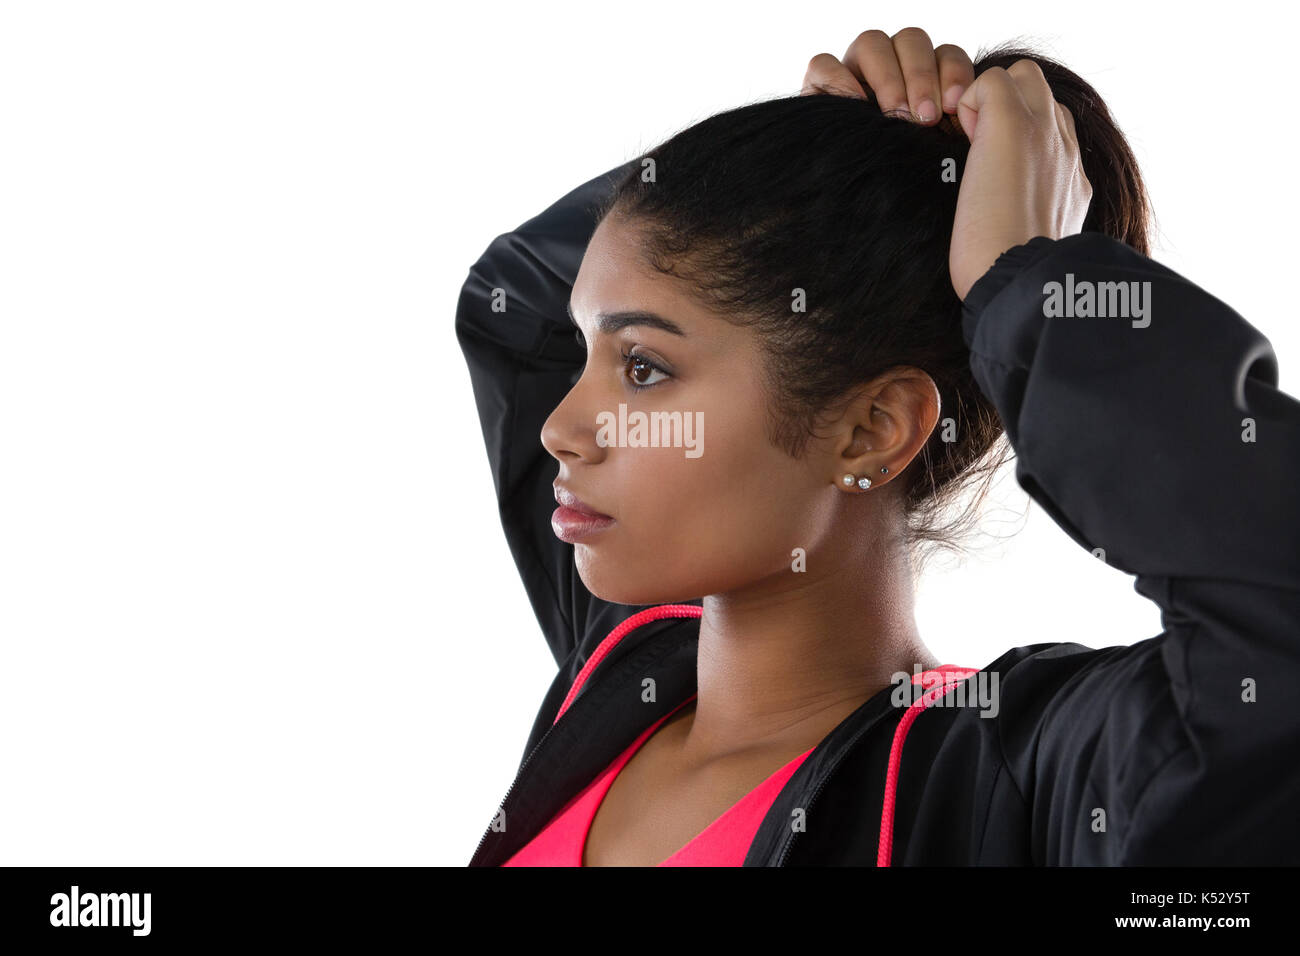 Young female athlete looking away while tying hair against white background Stock Photo